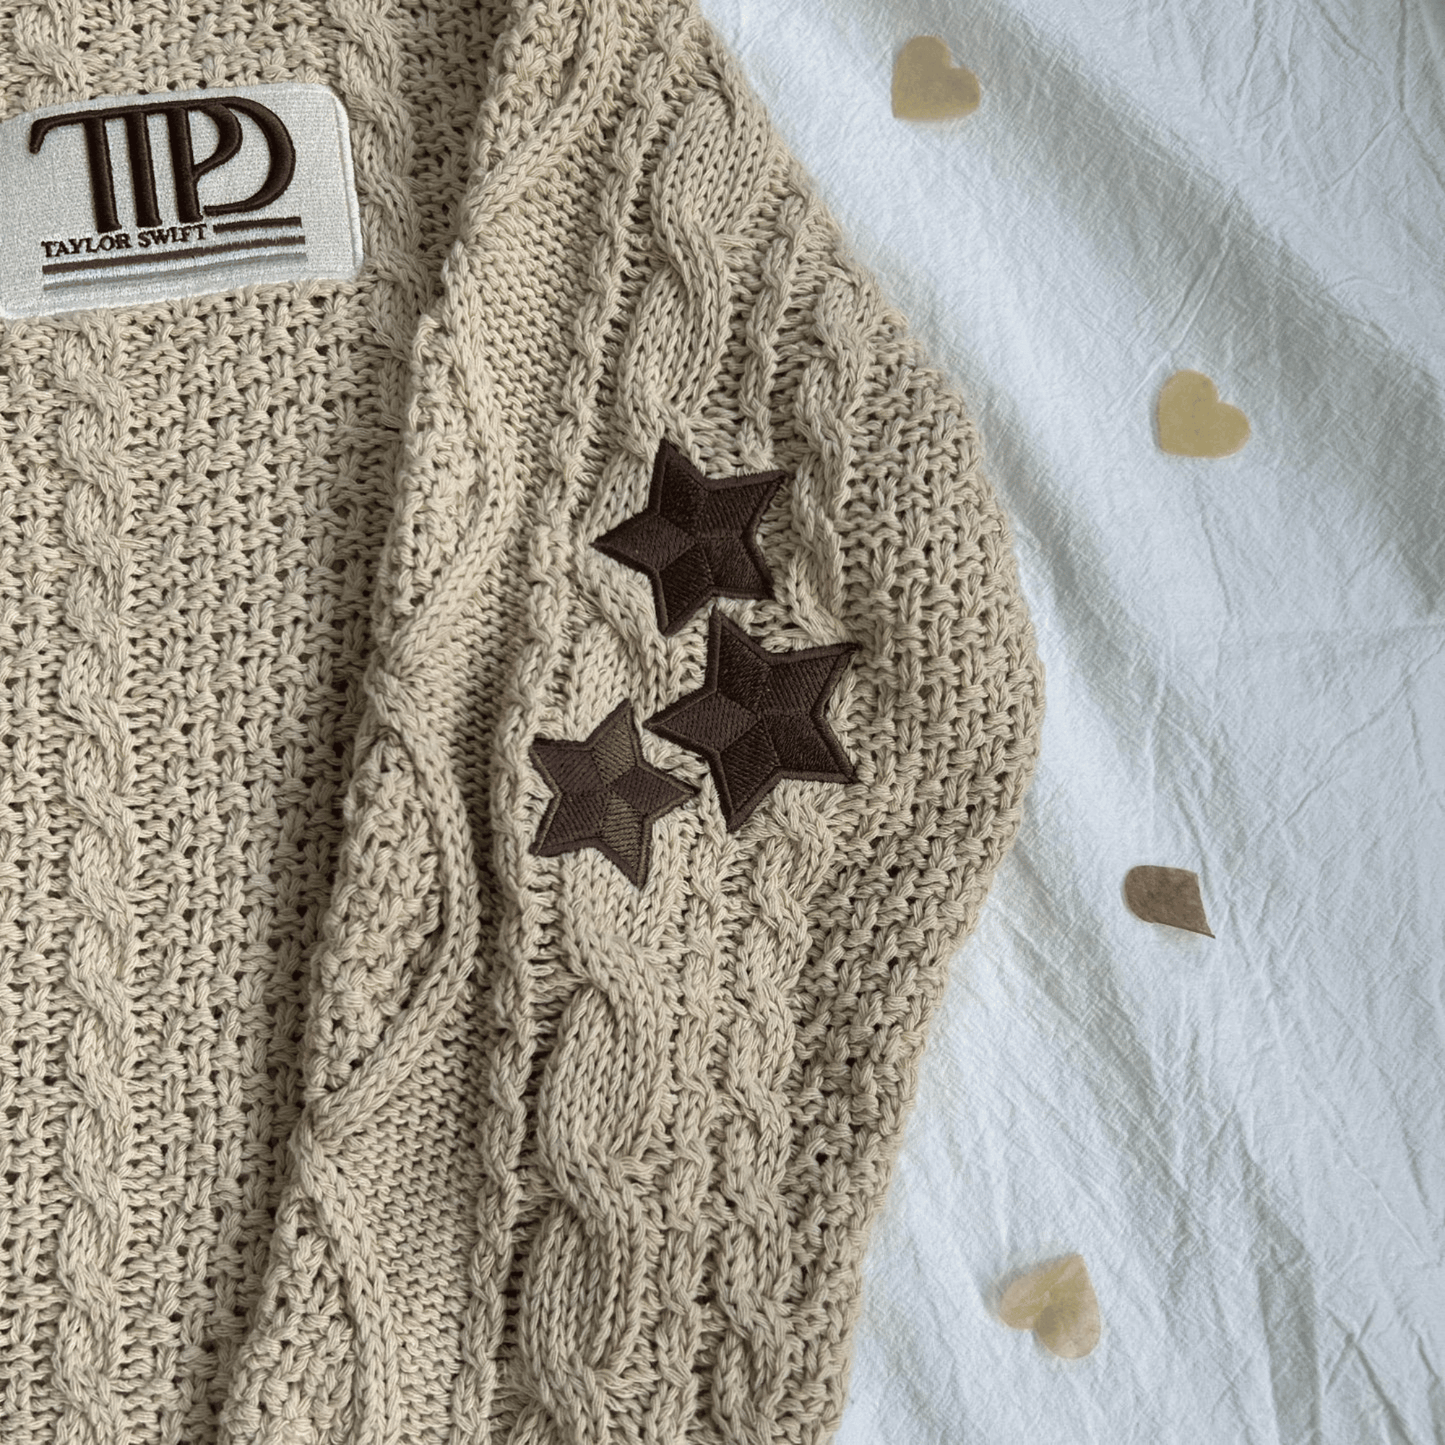 TTPD Cardigan with Taylor Swift patch and embroidered brown stars